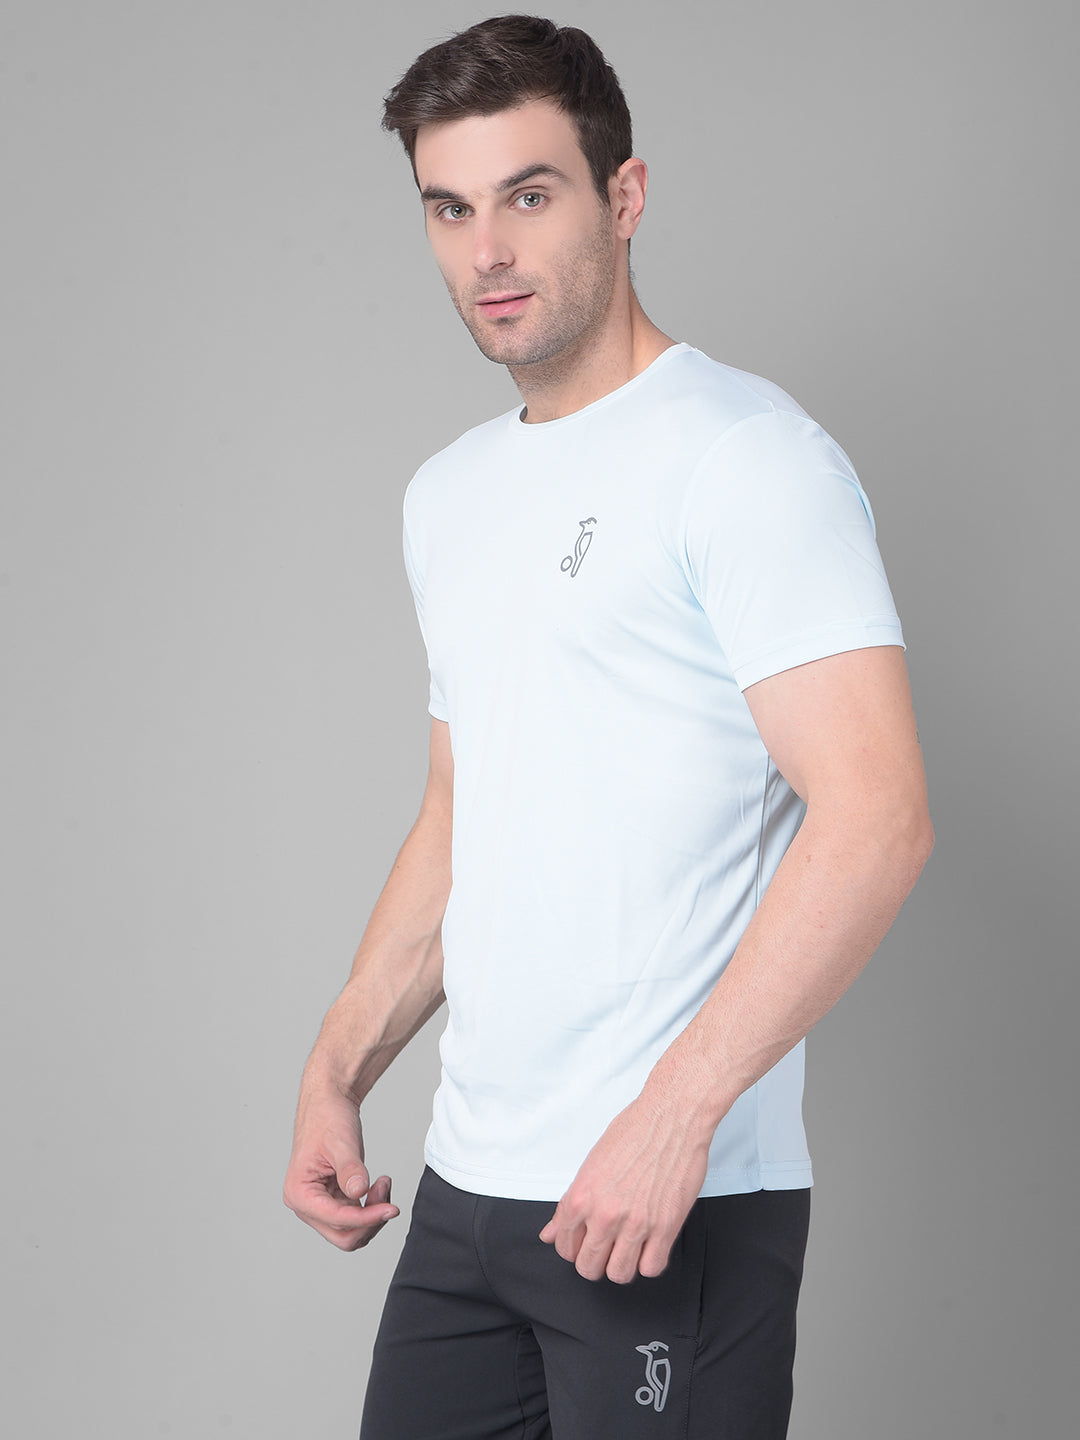 Sky Blue Serenity Kookaburra's Round Neck T-Shirt for a Fresh and Vibrant Look